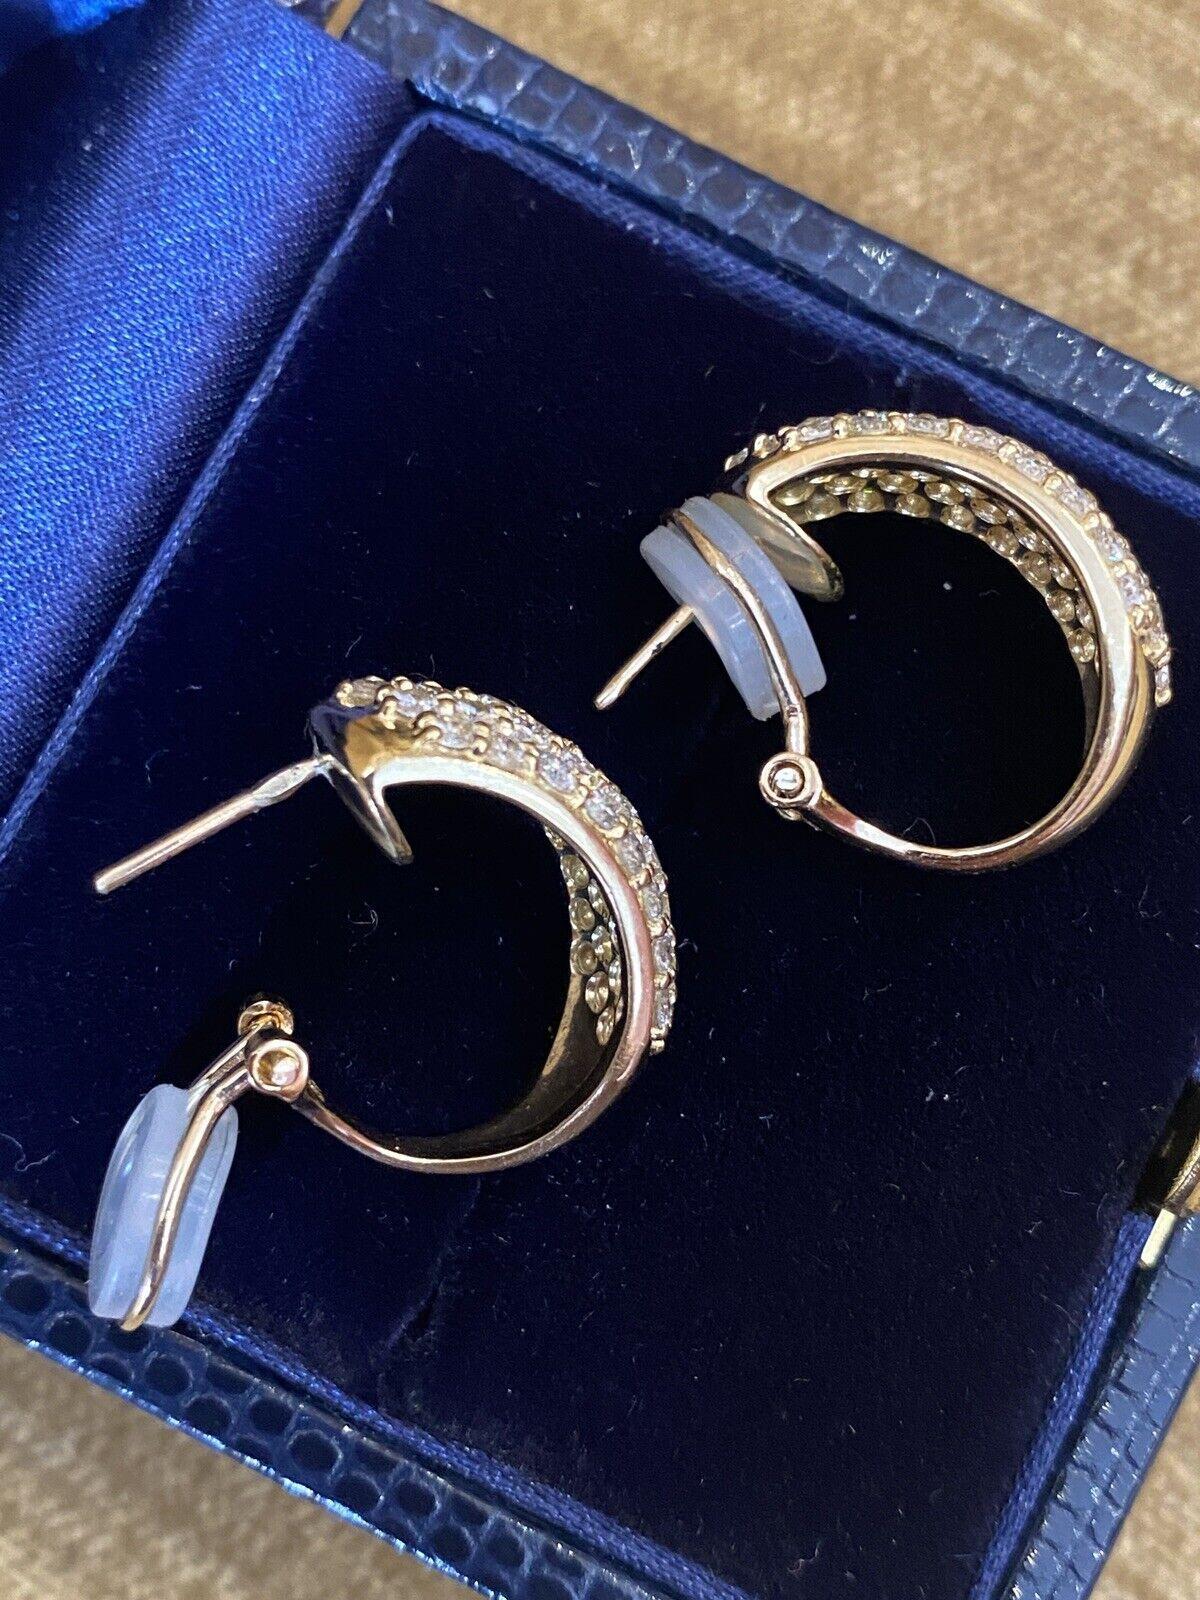 5 Row Pave Diamond Half Hoop Earrings 2.74 carat total weight in 18k Yellow Gold

Diamond Pave Hoop Earrings feature Five Rows of Round Brilliant Diamonds weighing 2.74 carats in total, all set in 18k Yellow Gold. The earrings are secured by posts